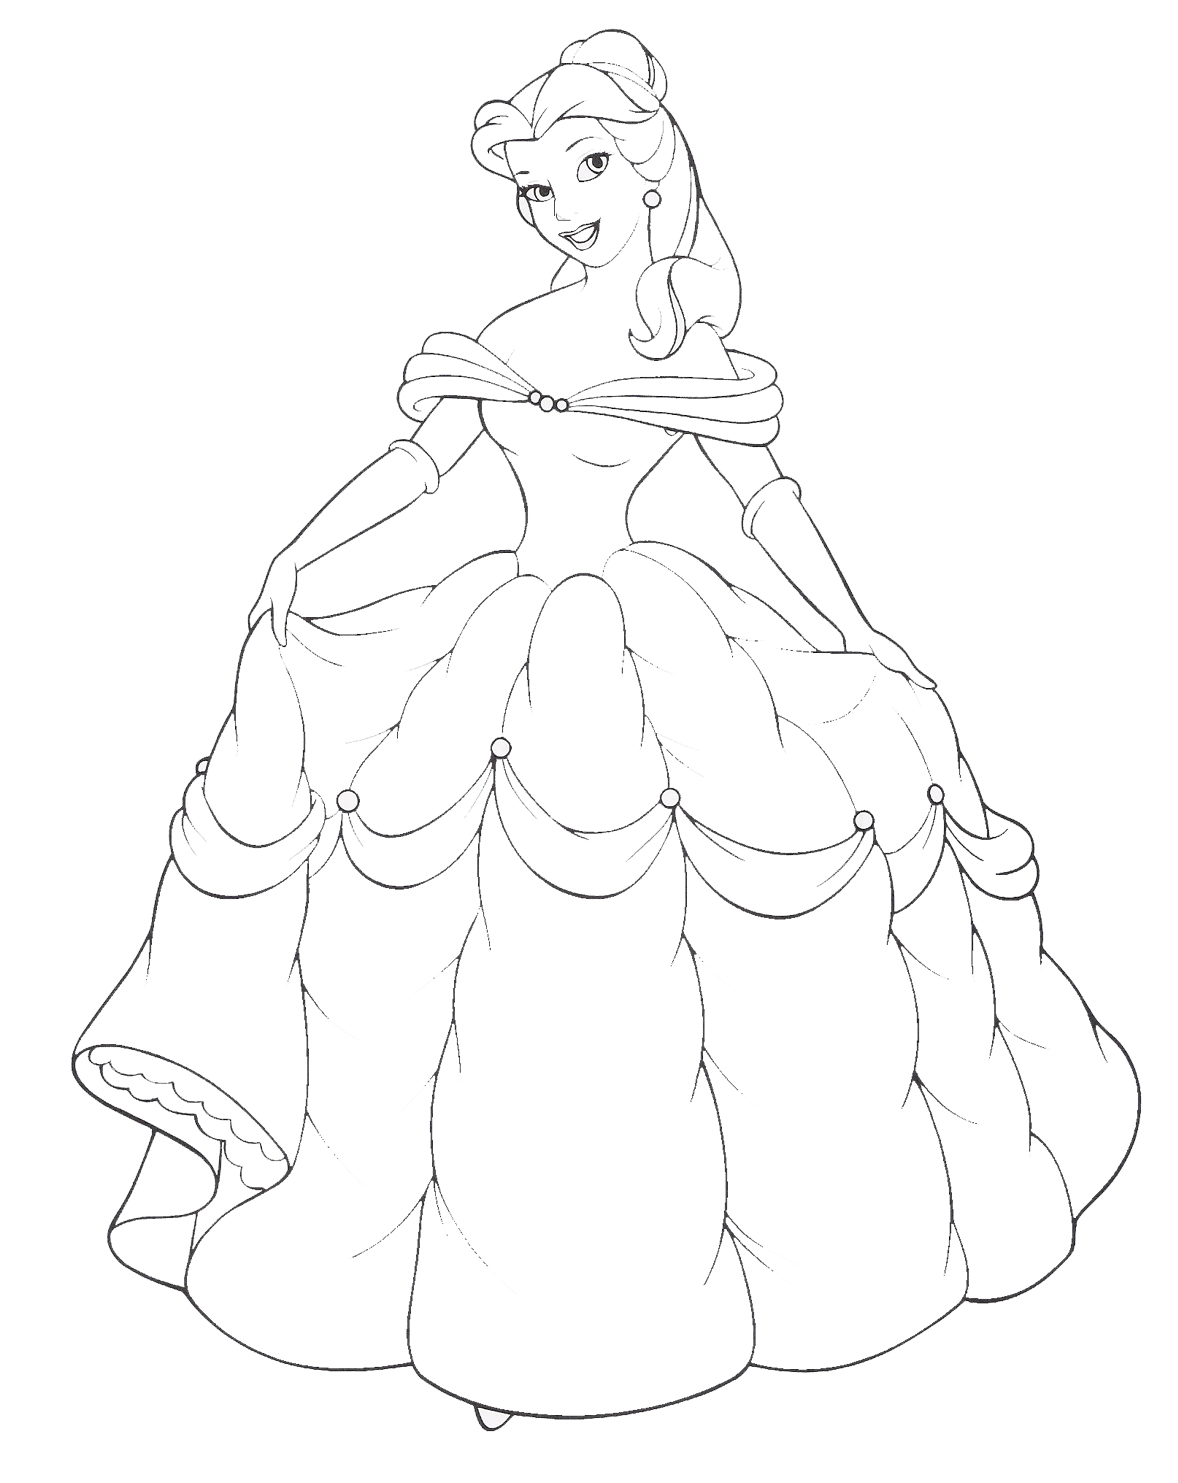 Download Disney Princess Belle and Her Gown Coloring Sheet